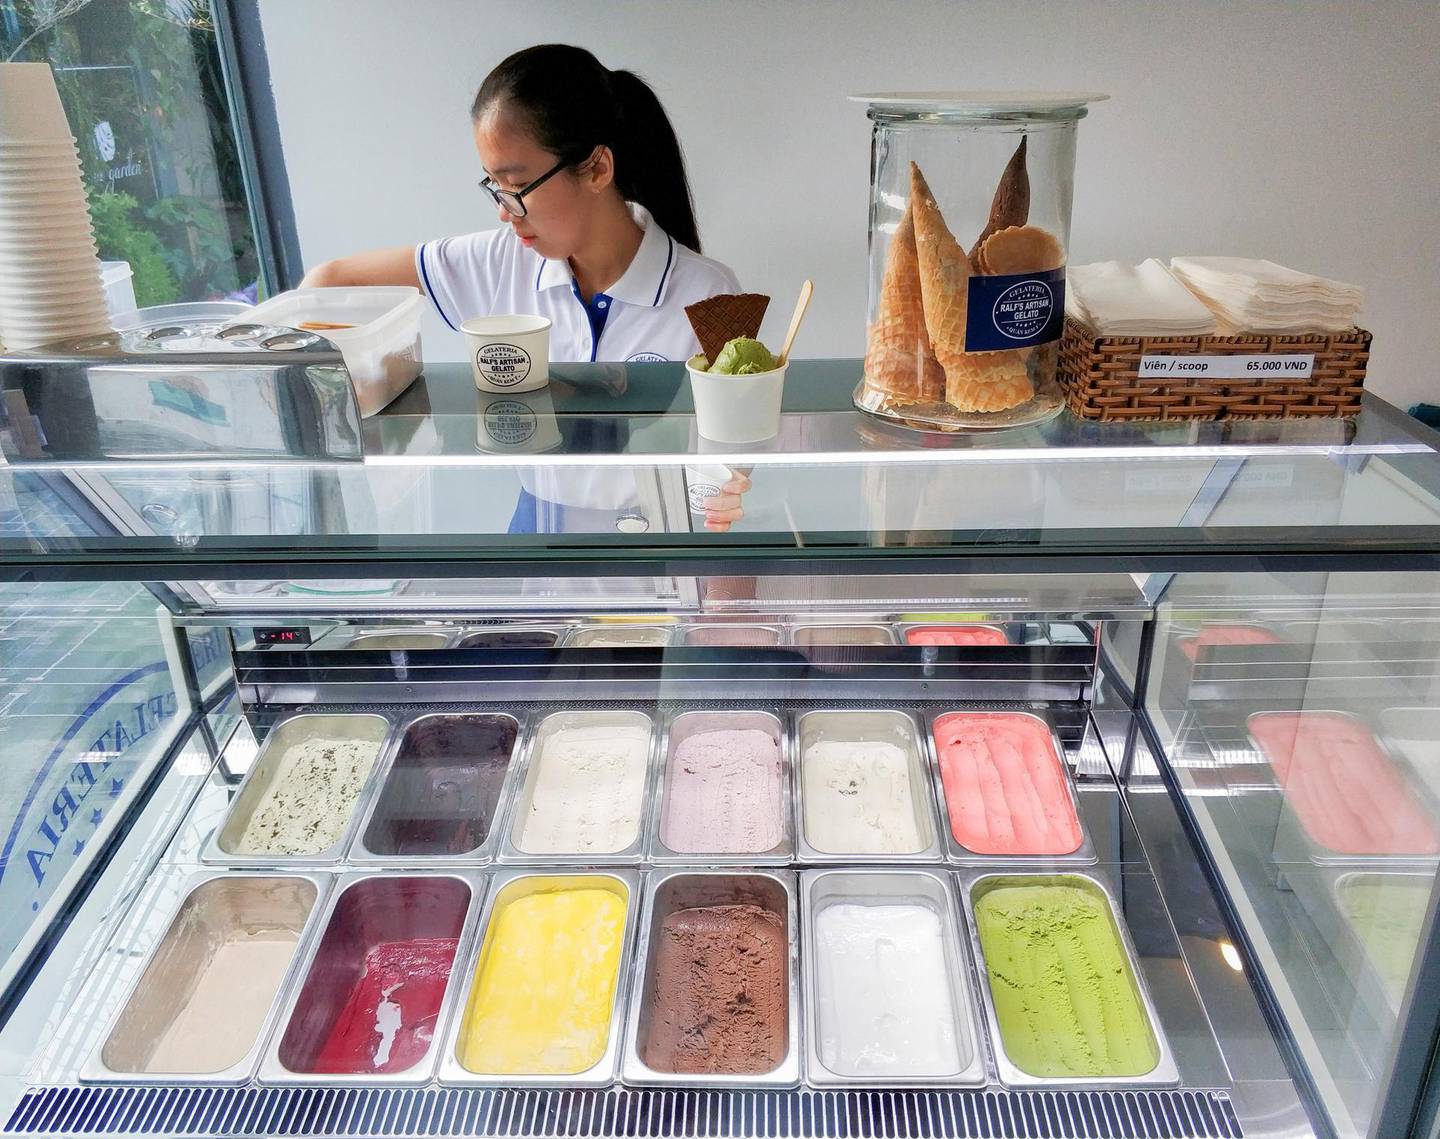 Ralf’s Artisan Gelato serves regular fruity flavours, plus gelatos made from pho, fish sauce and black sticky rice. Photo: Ronan O’Connell